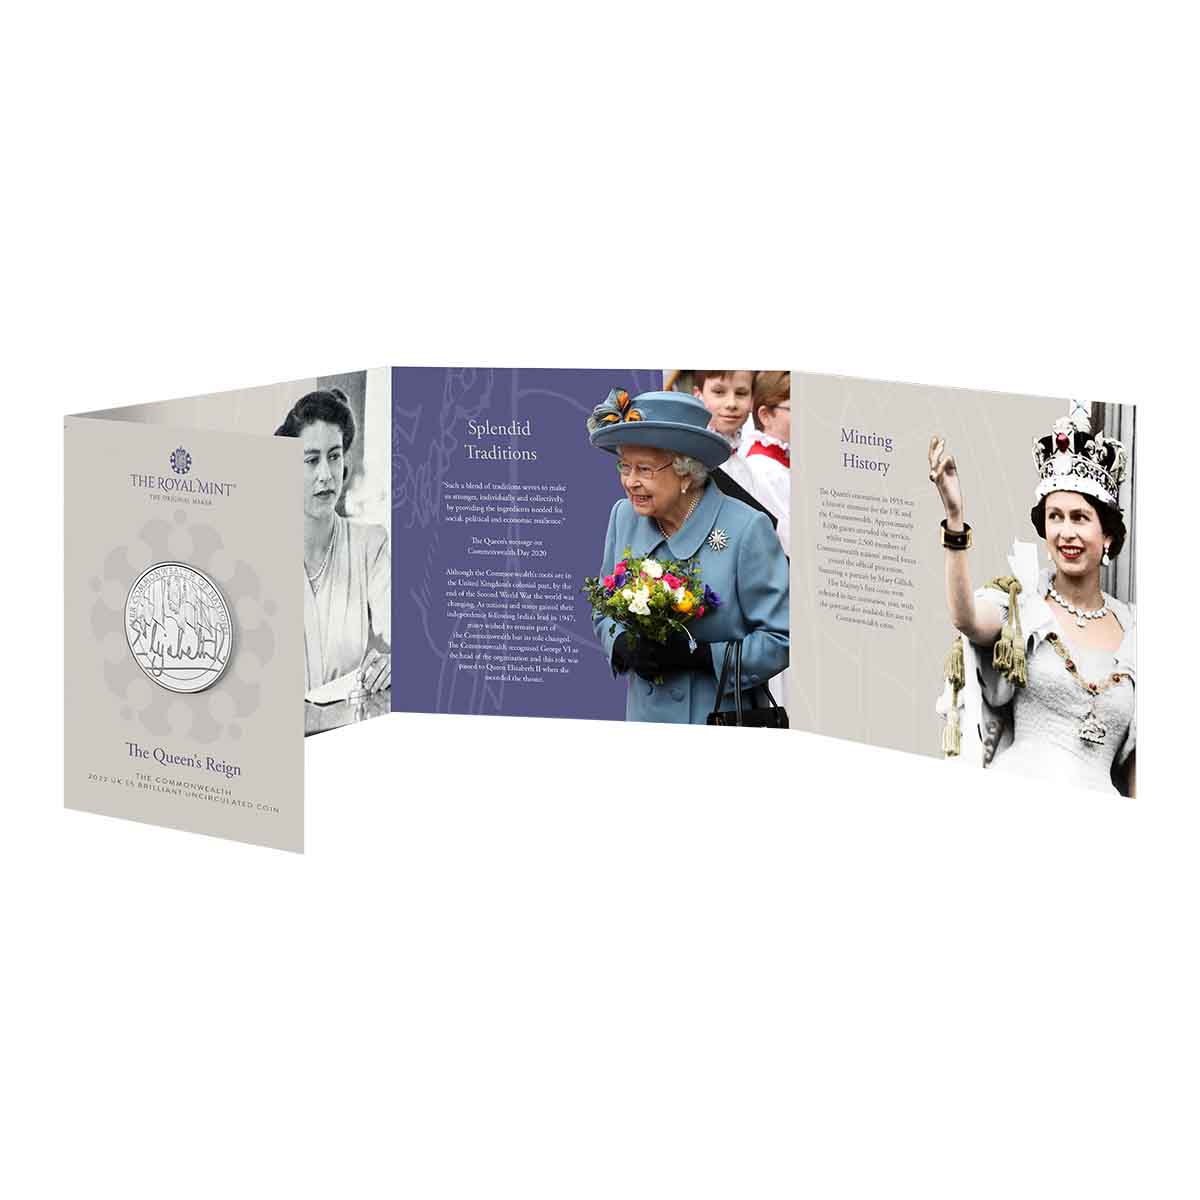 The Queen's Reign The Commonwealth 2022 £5 Cupro-Nickel Brilliant Uncirculated Coin